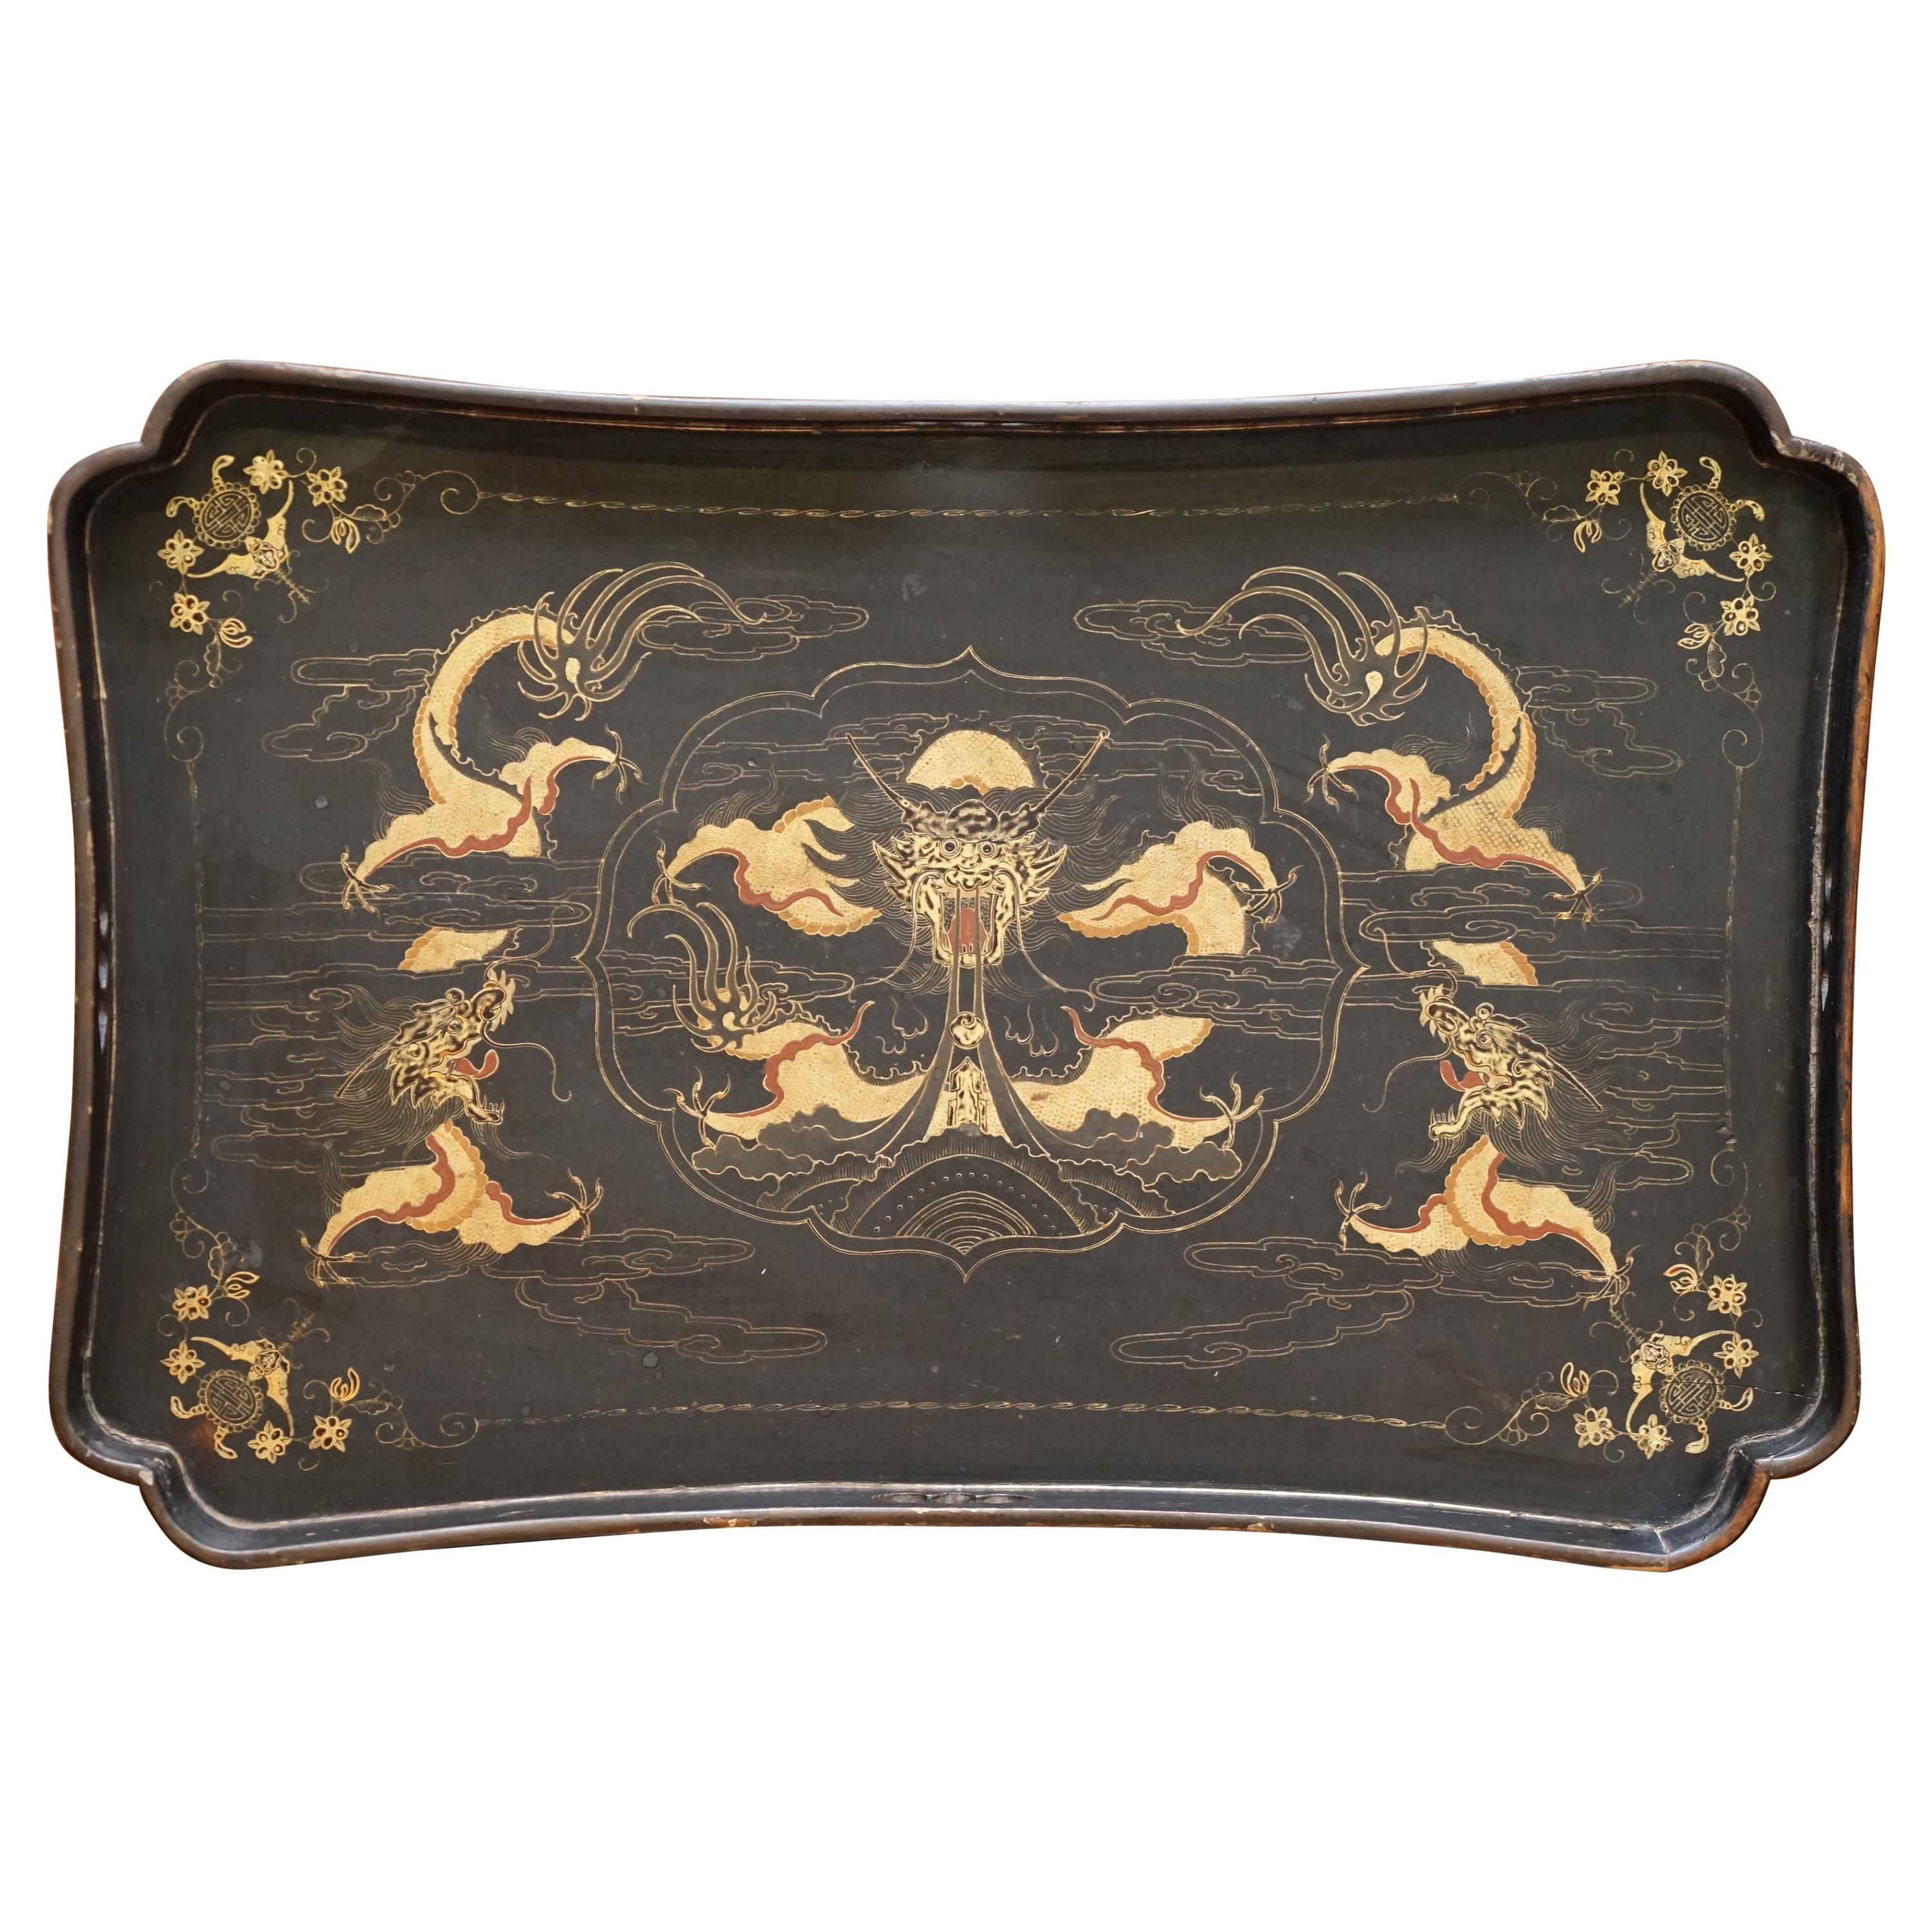 Stunning Antique Chinese Gold Gilt Painted Paper Mache Large Serving Dinner Tray For Sale